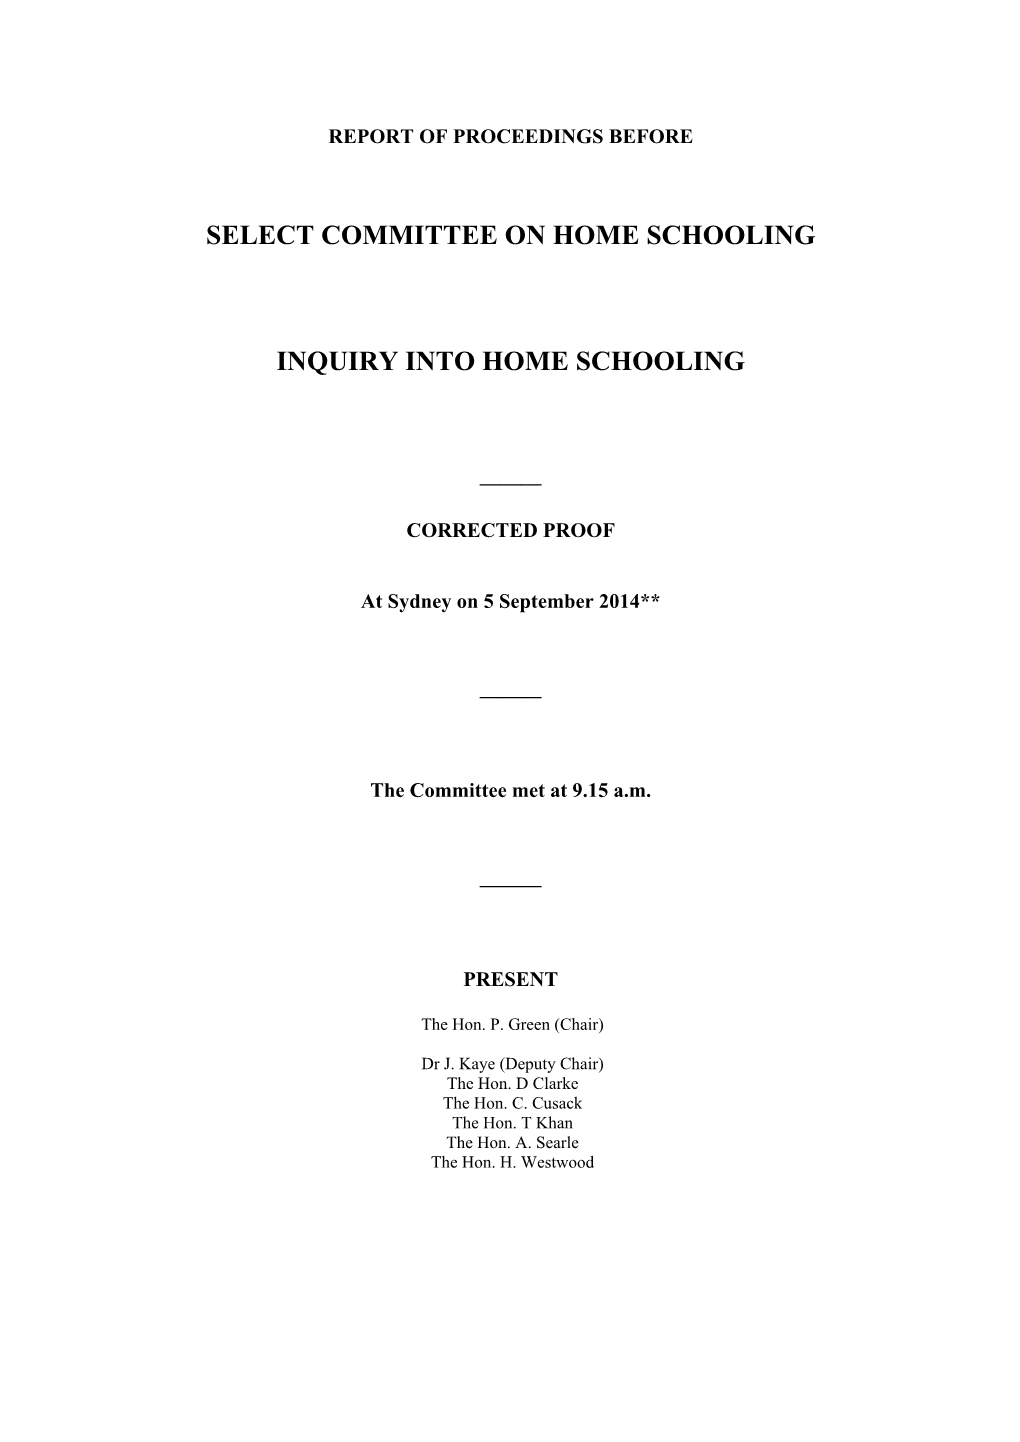 Select Committee on Home Schooling Inquiry Into Home